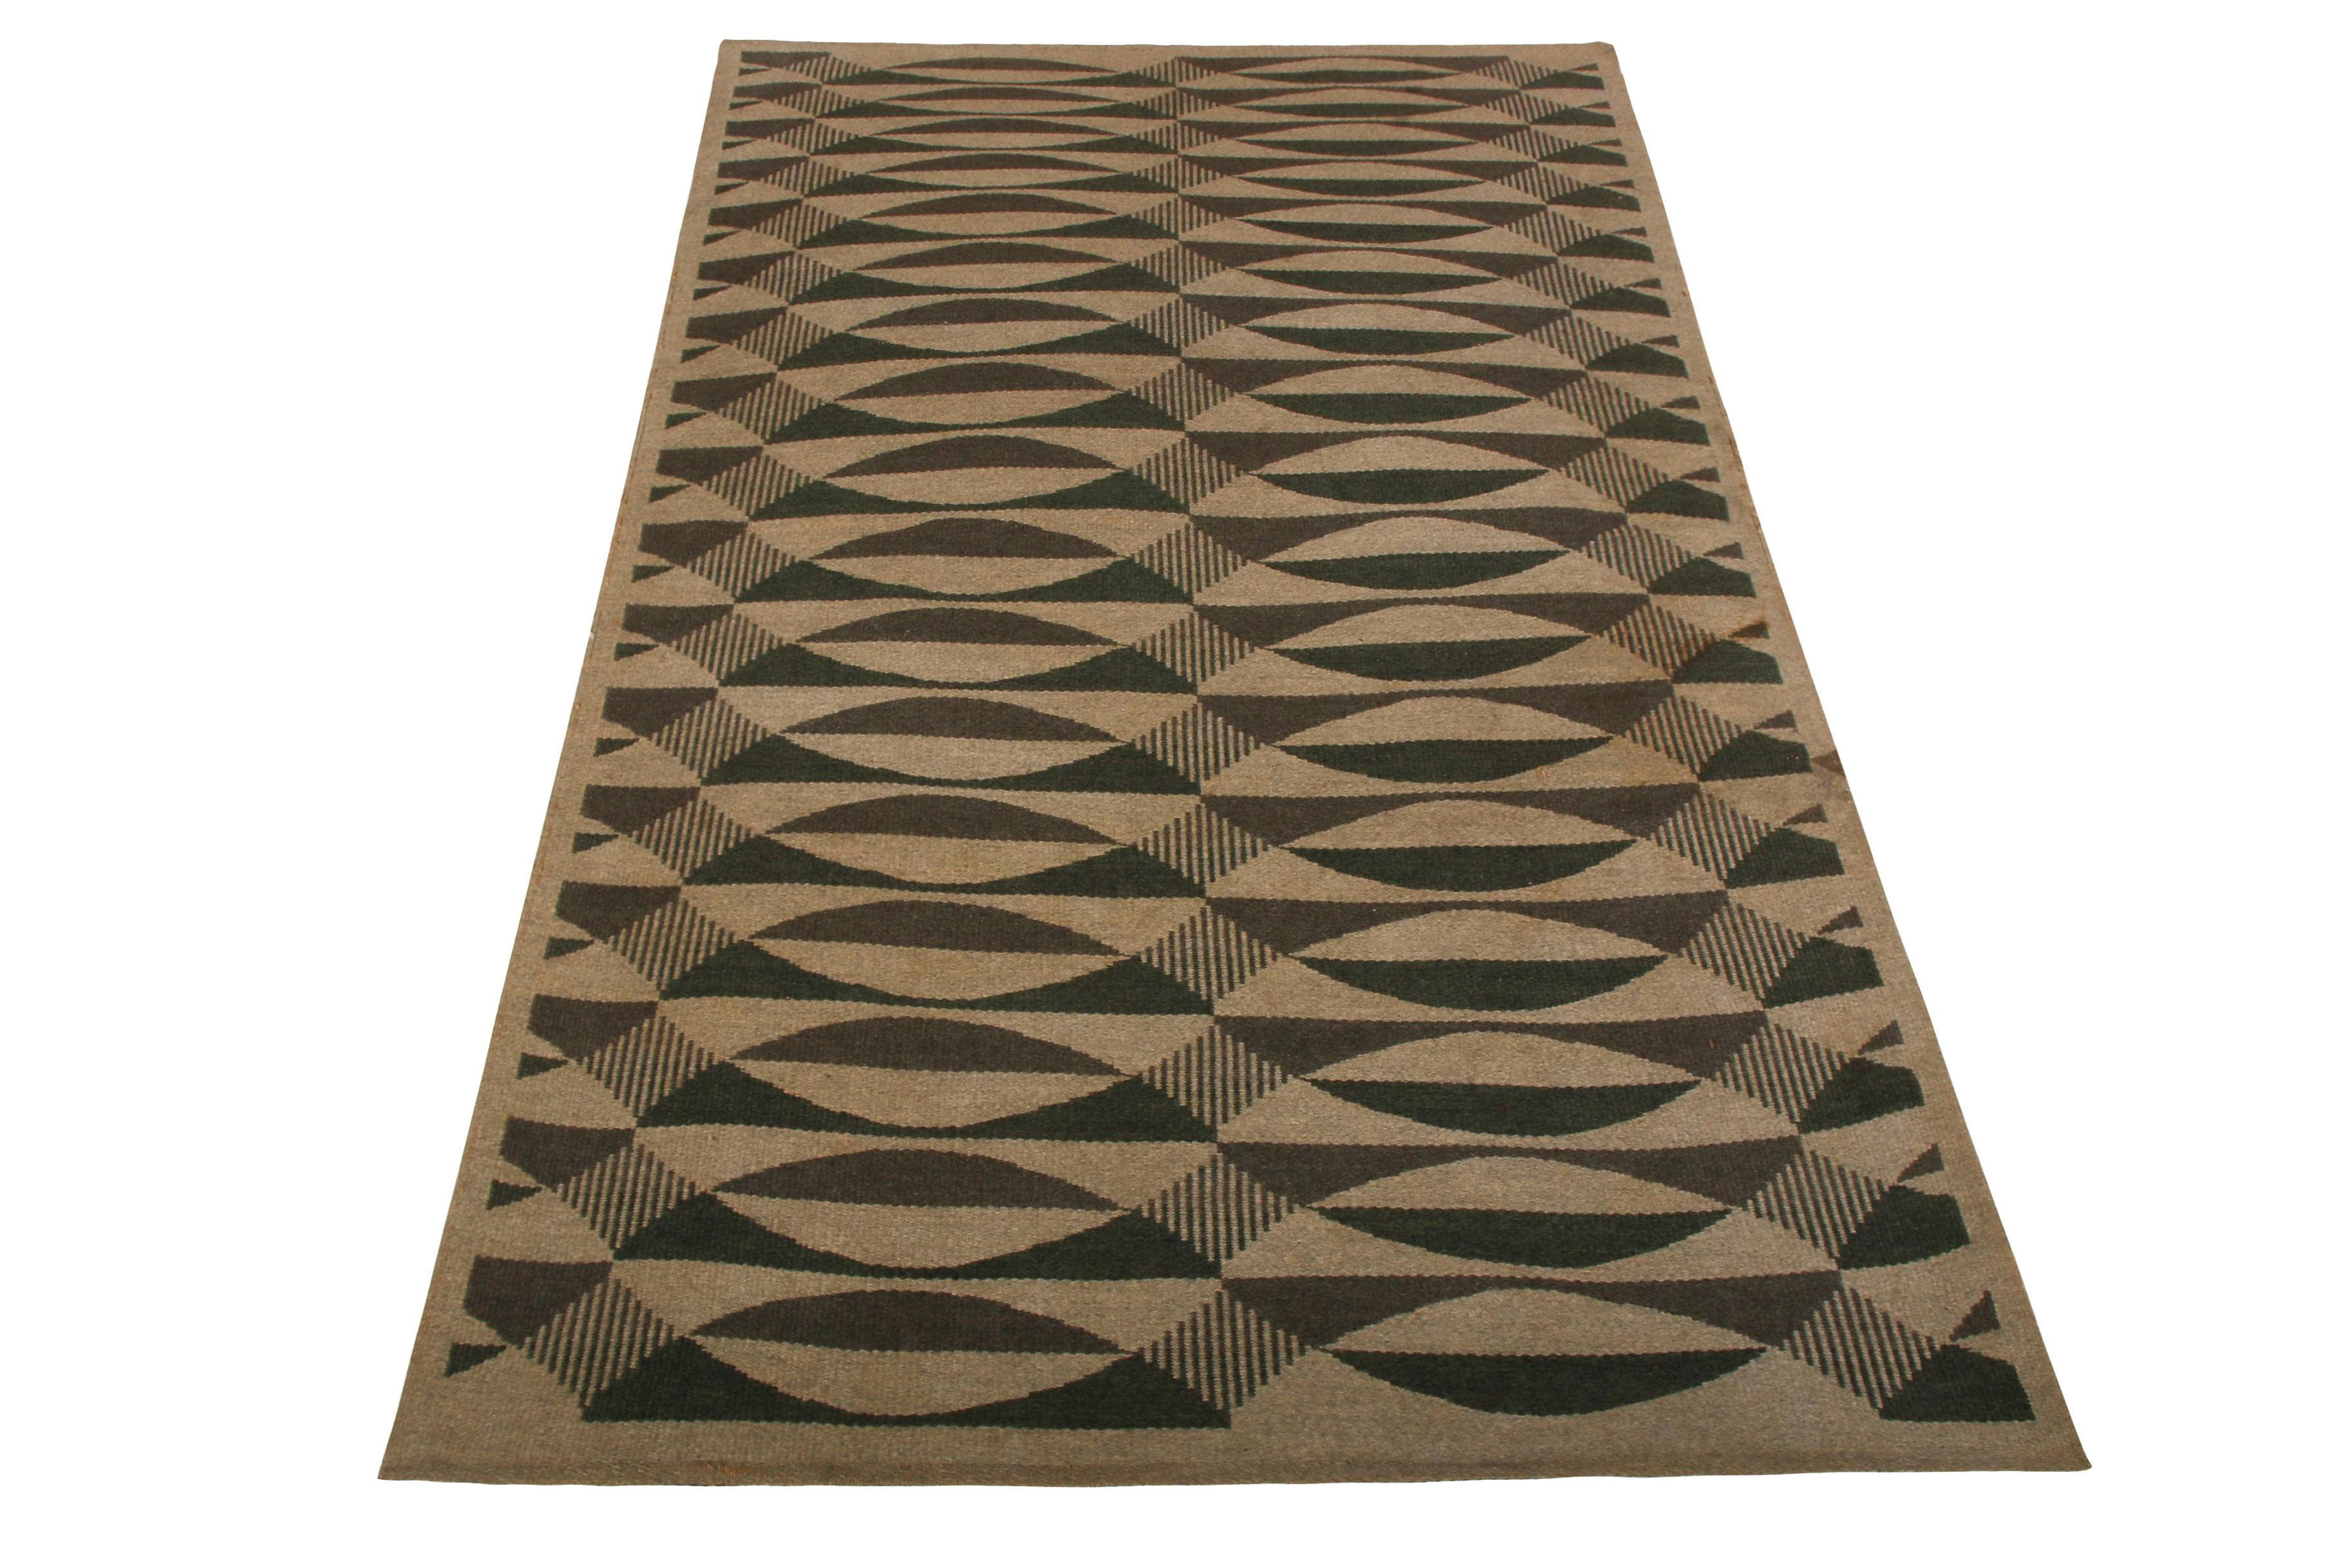 Handwoven in wool originating from Scandinavia, this vintage midcentury flat-weave enjoys a hypnotic play of color and pattern in the marriage of the rustic beige-brown with a subtle green accent in the geometric pattern. The play of the